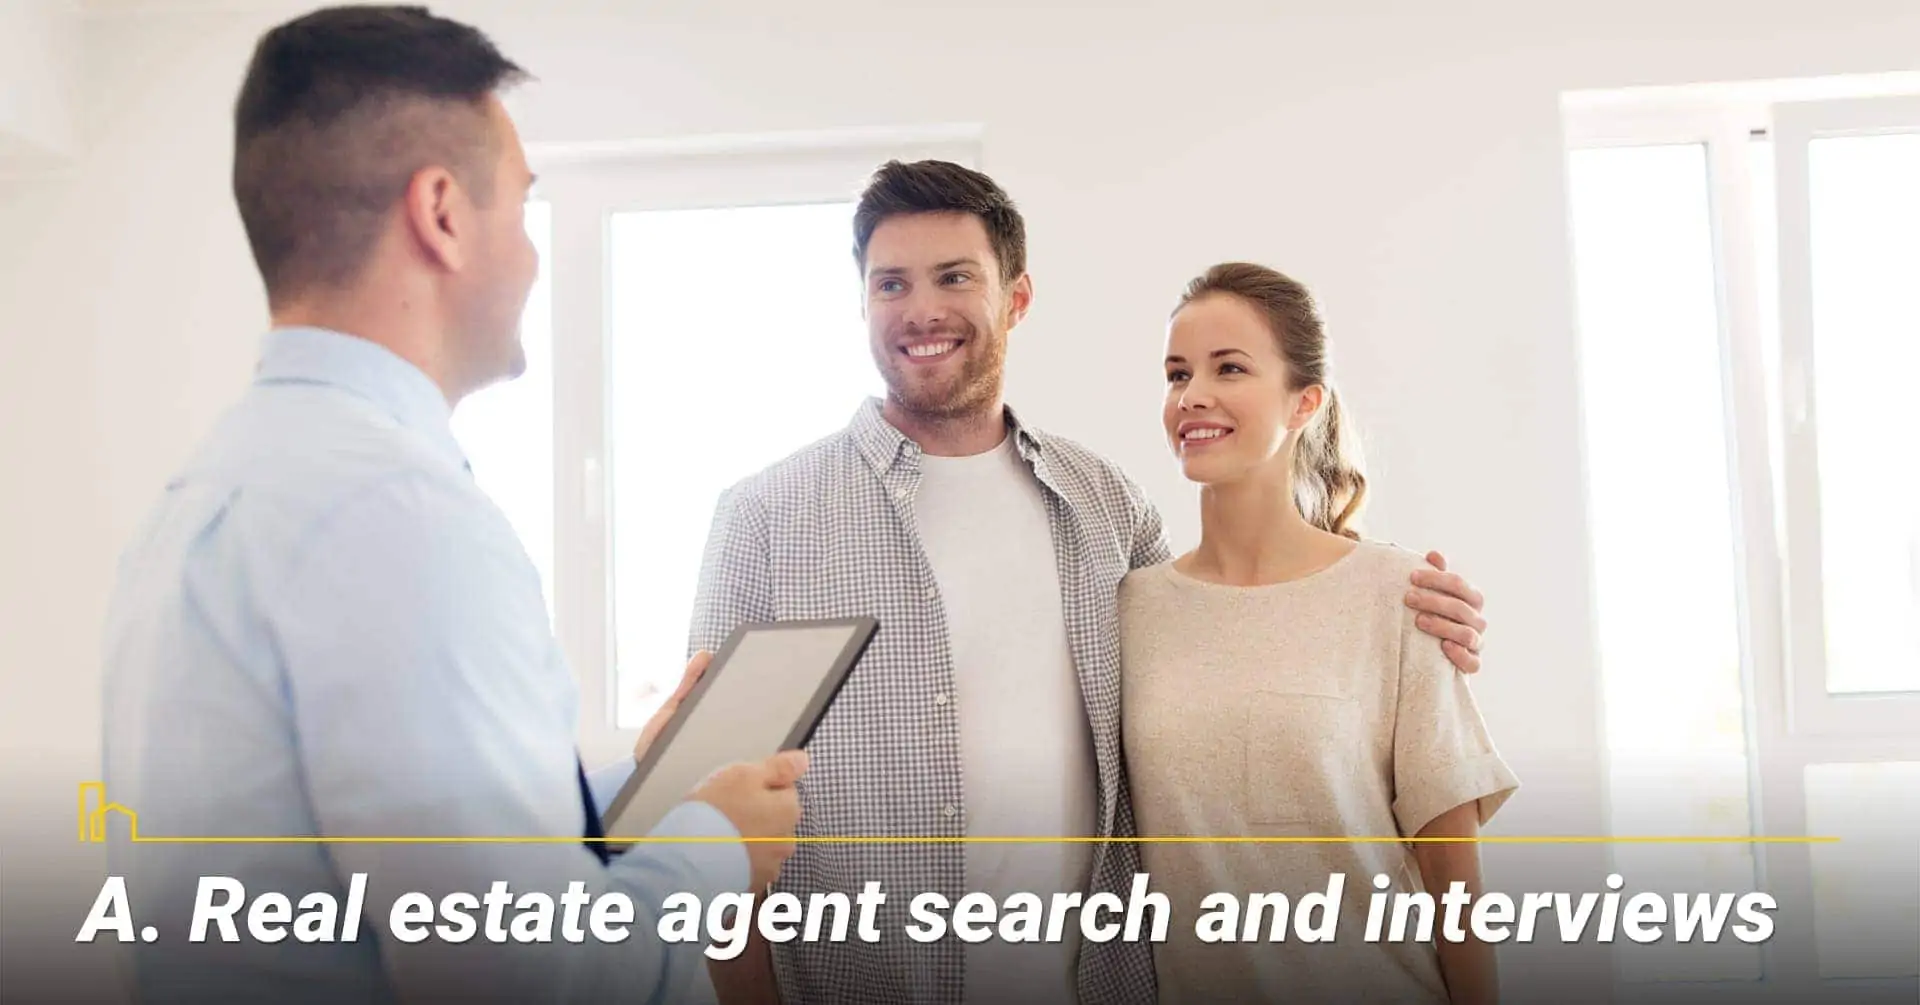 Real estate agent search and interviews, looking for professional real estate agent